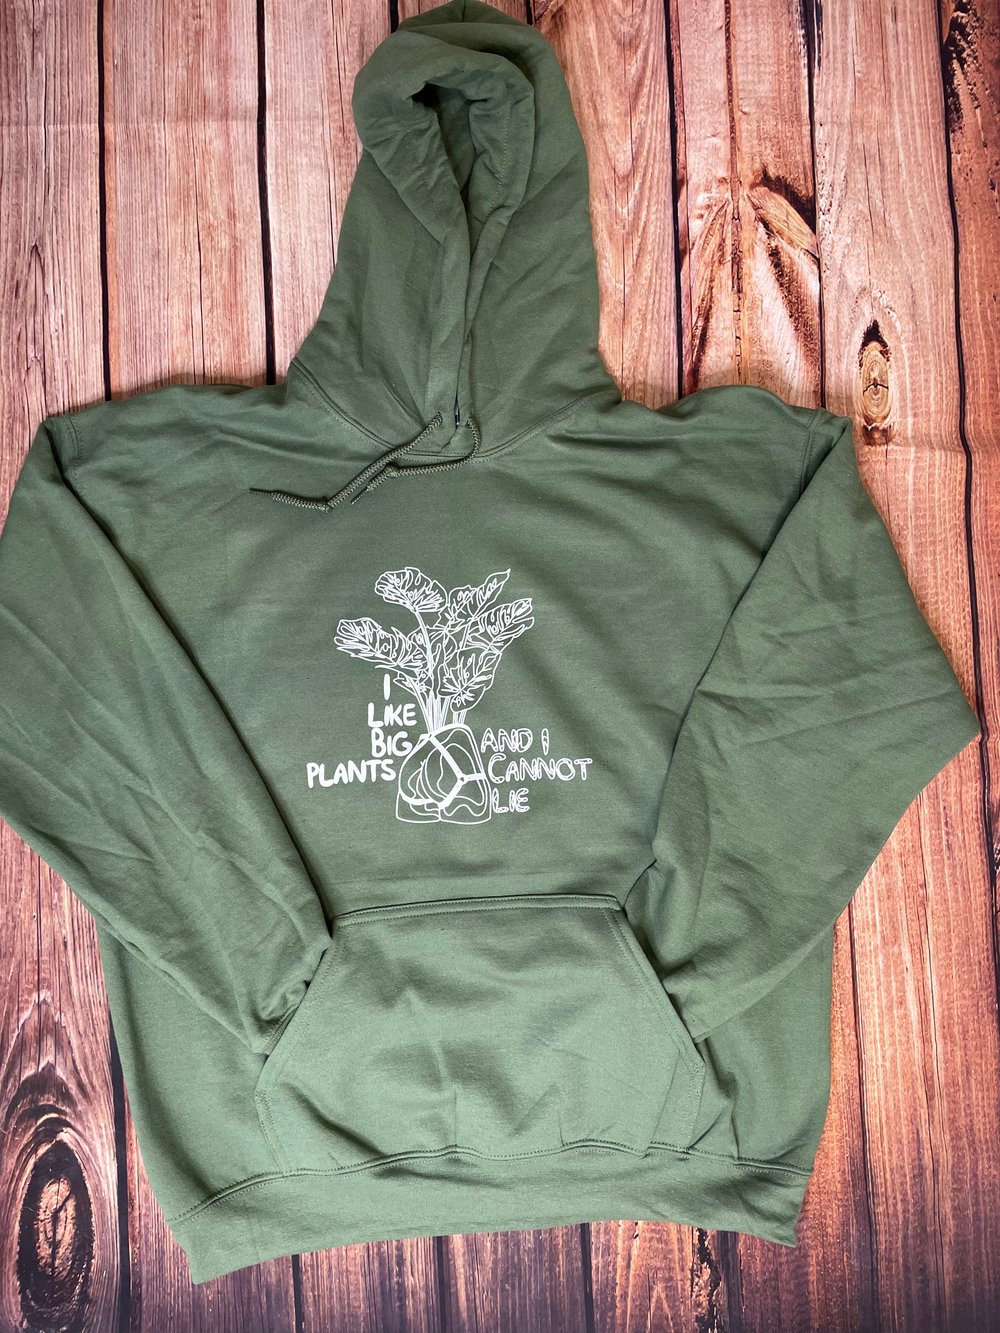 I like big plants and I cannot lie hoodies (multiple colors available)